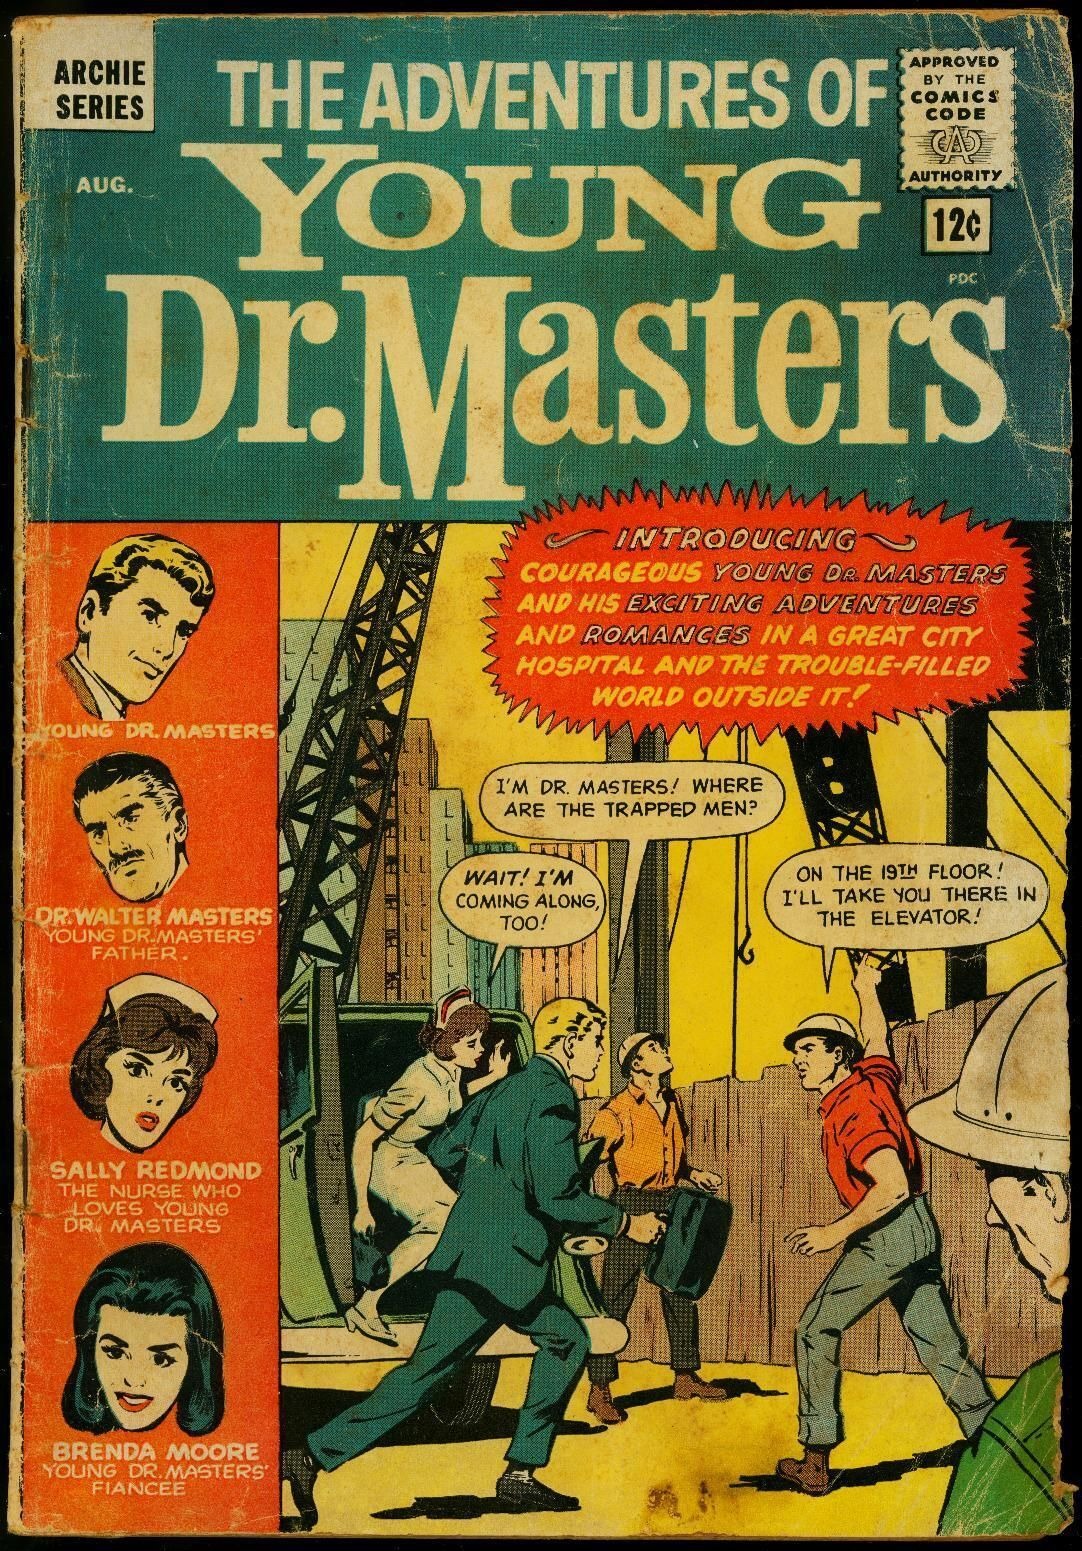 The first issue of Young Doctor Masters